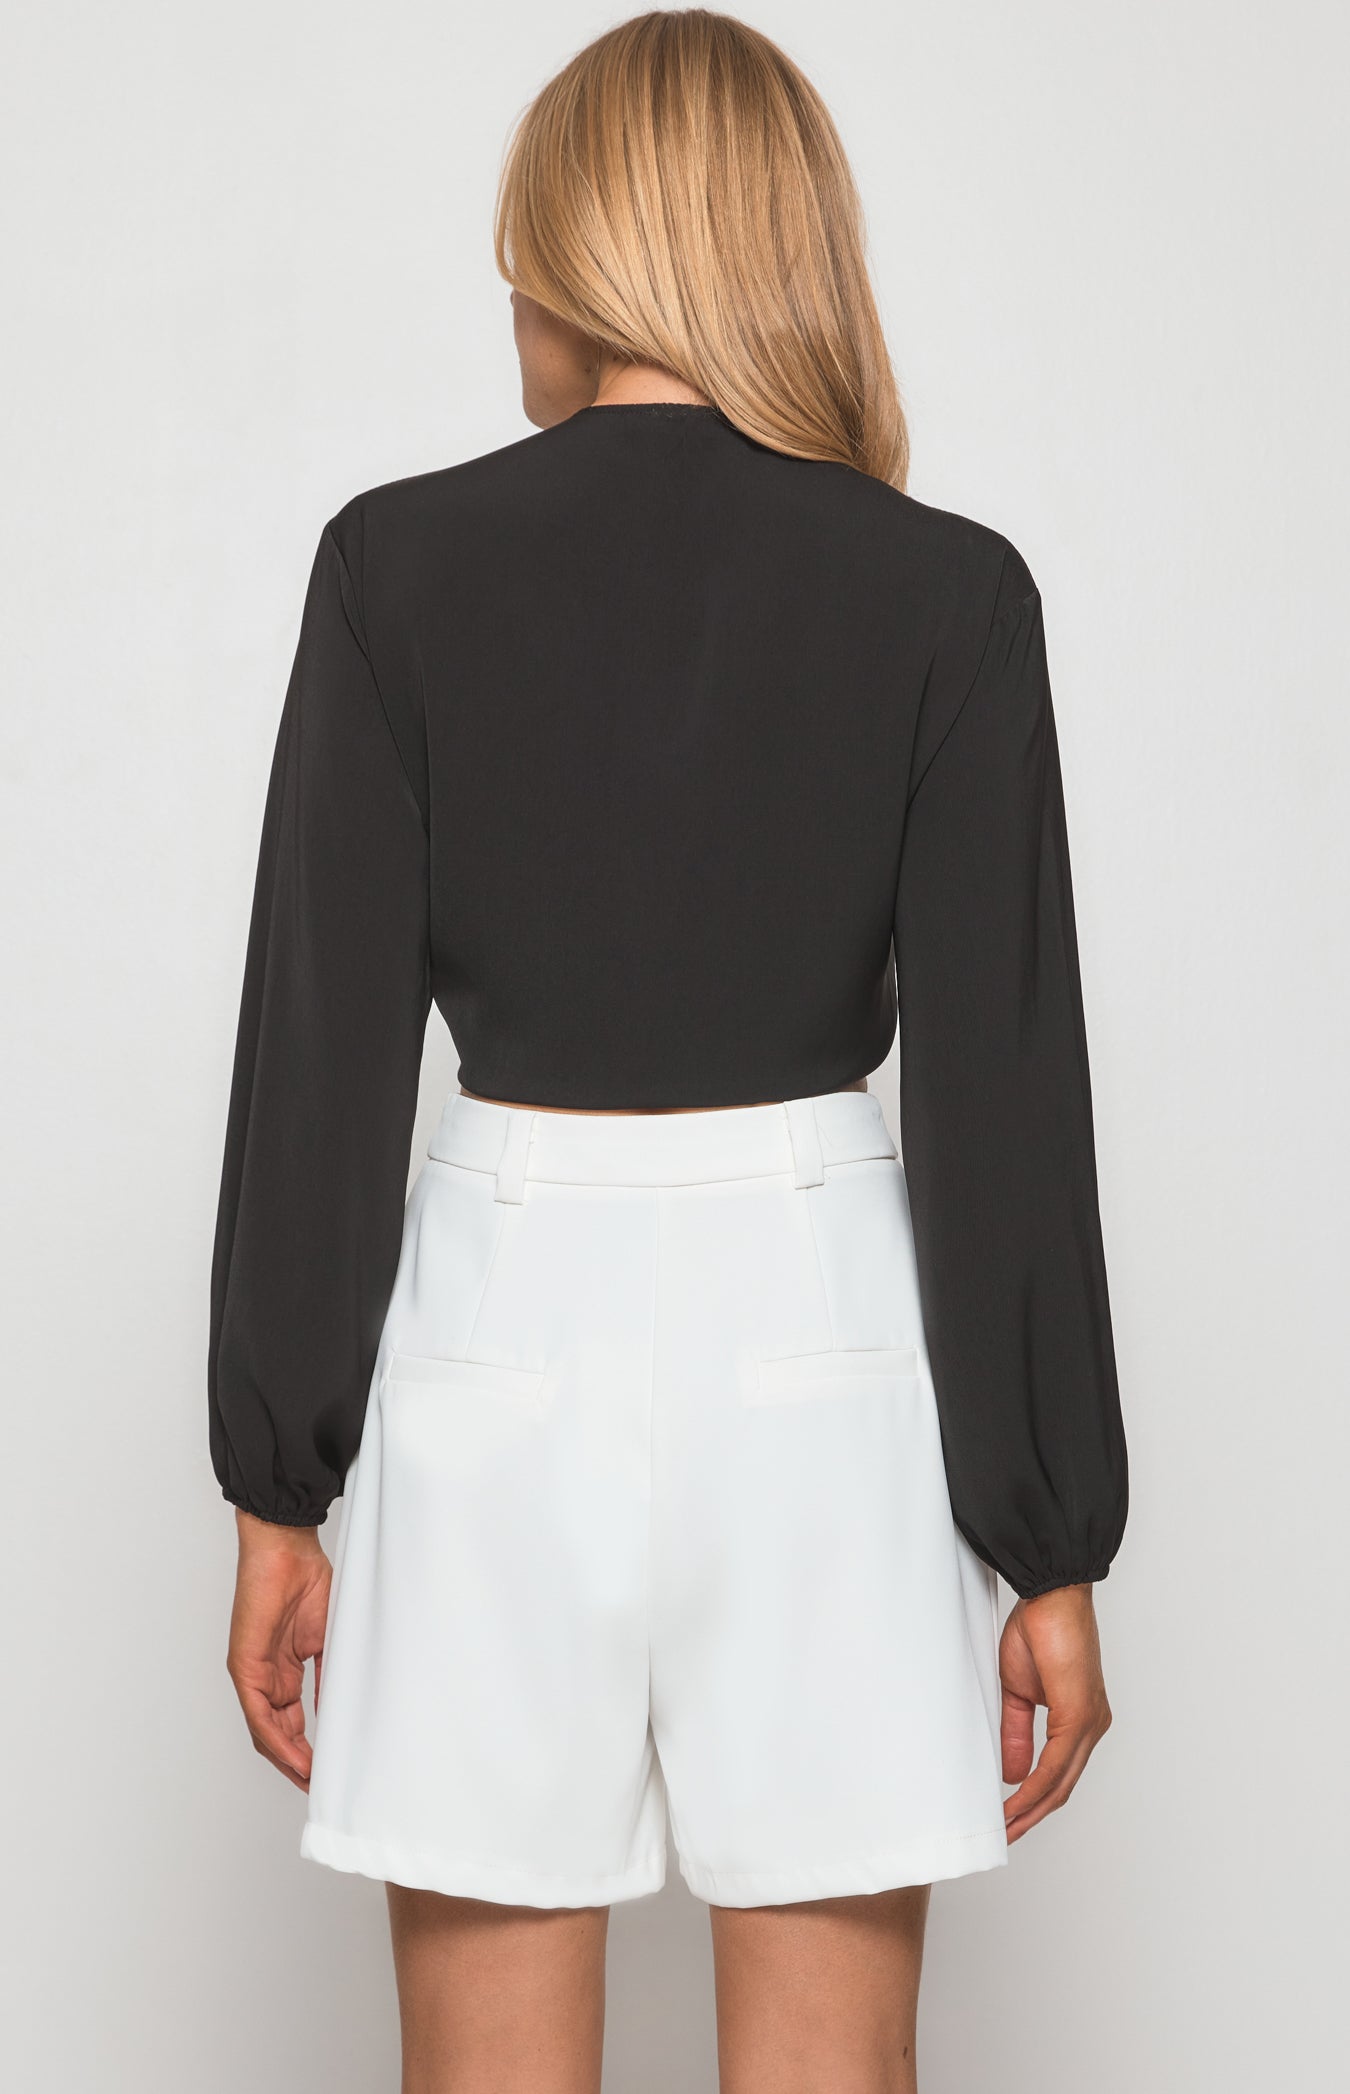 MAREE TOP - TWIST FRONT CROPPED LONG SLEEVE TOP